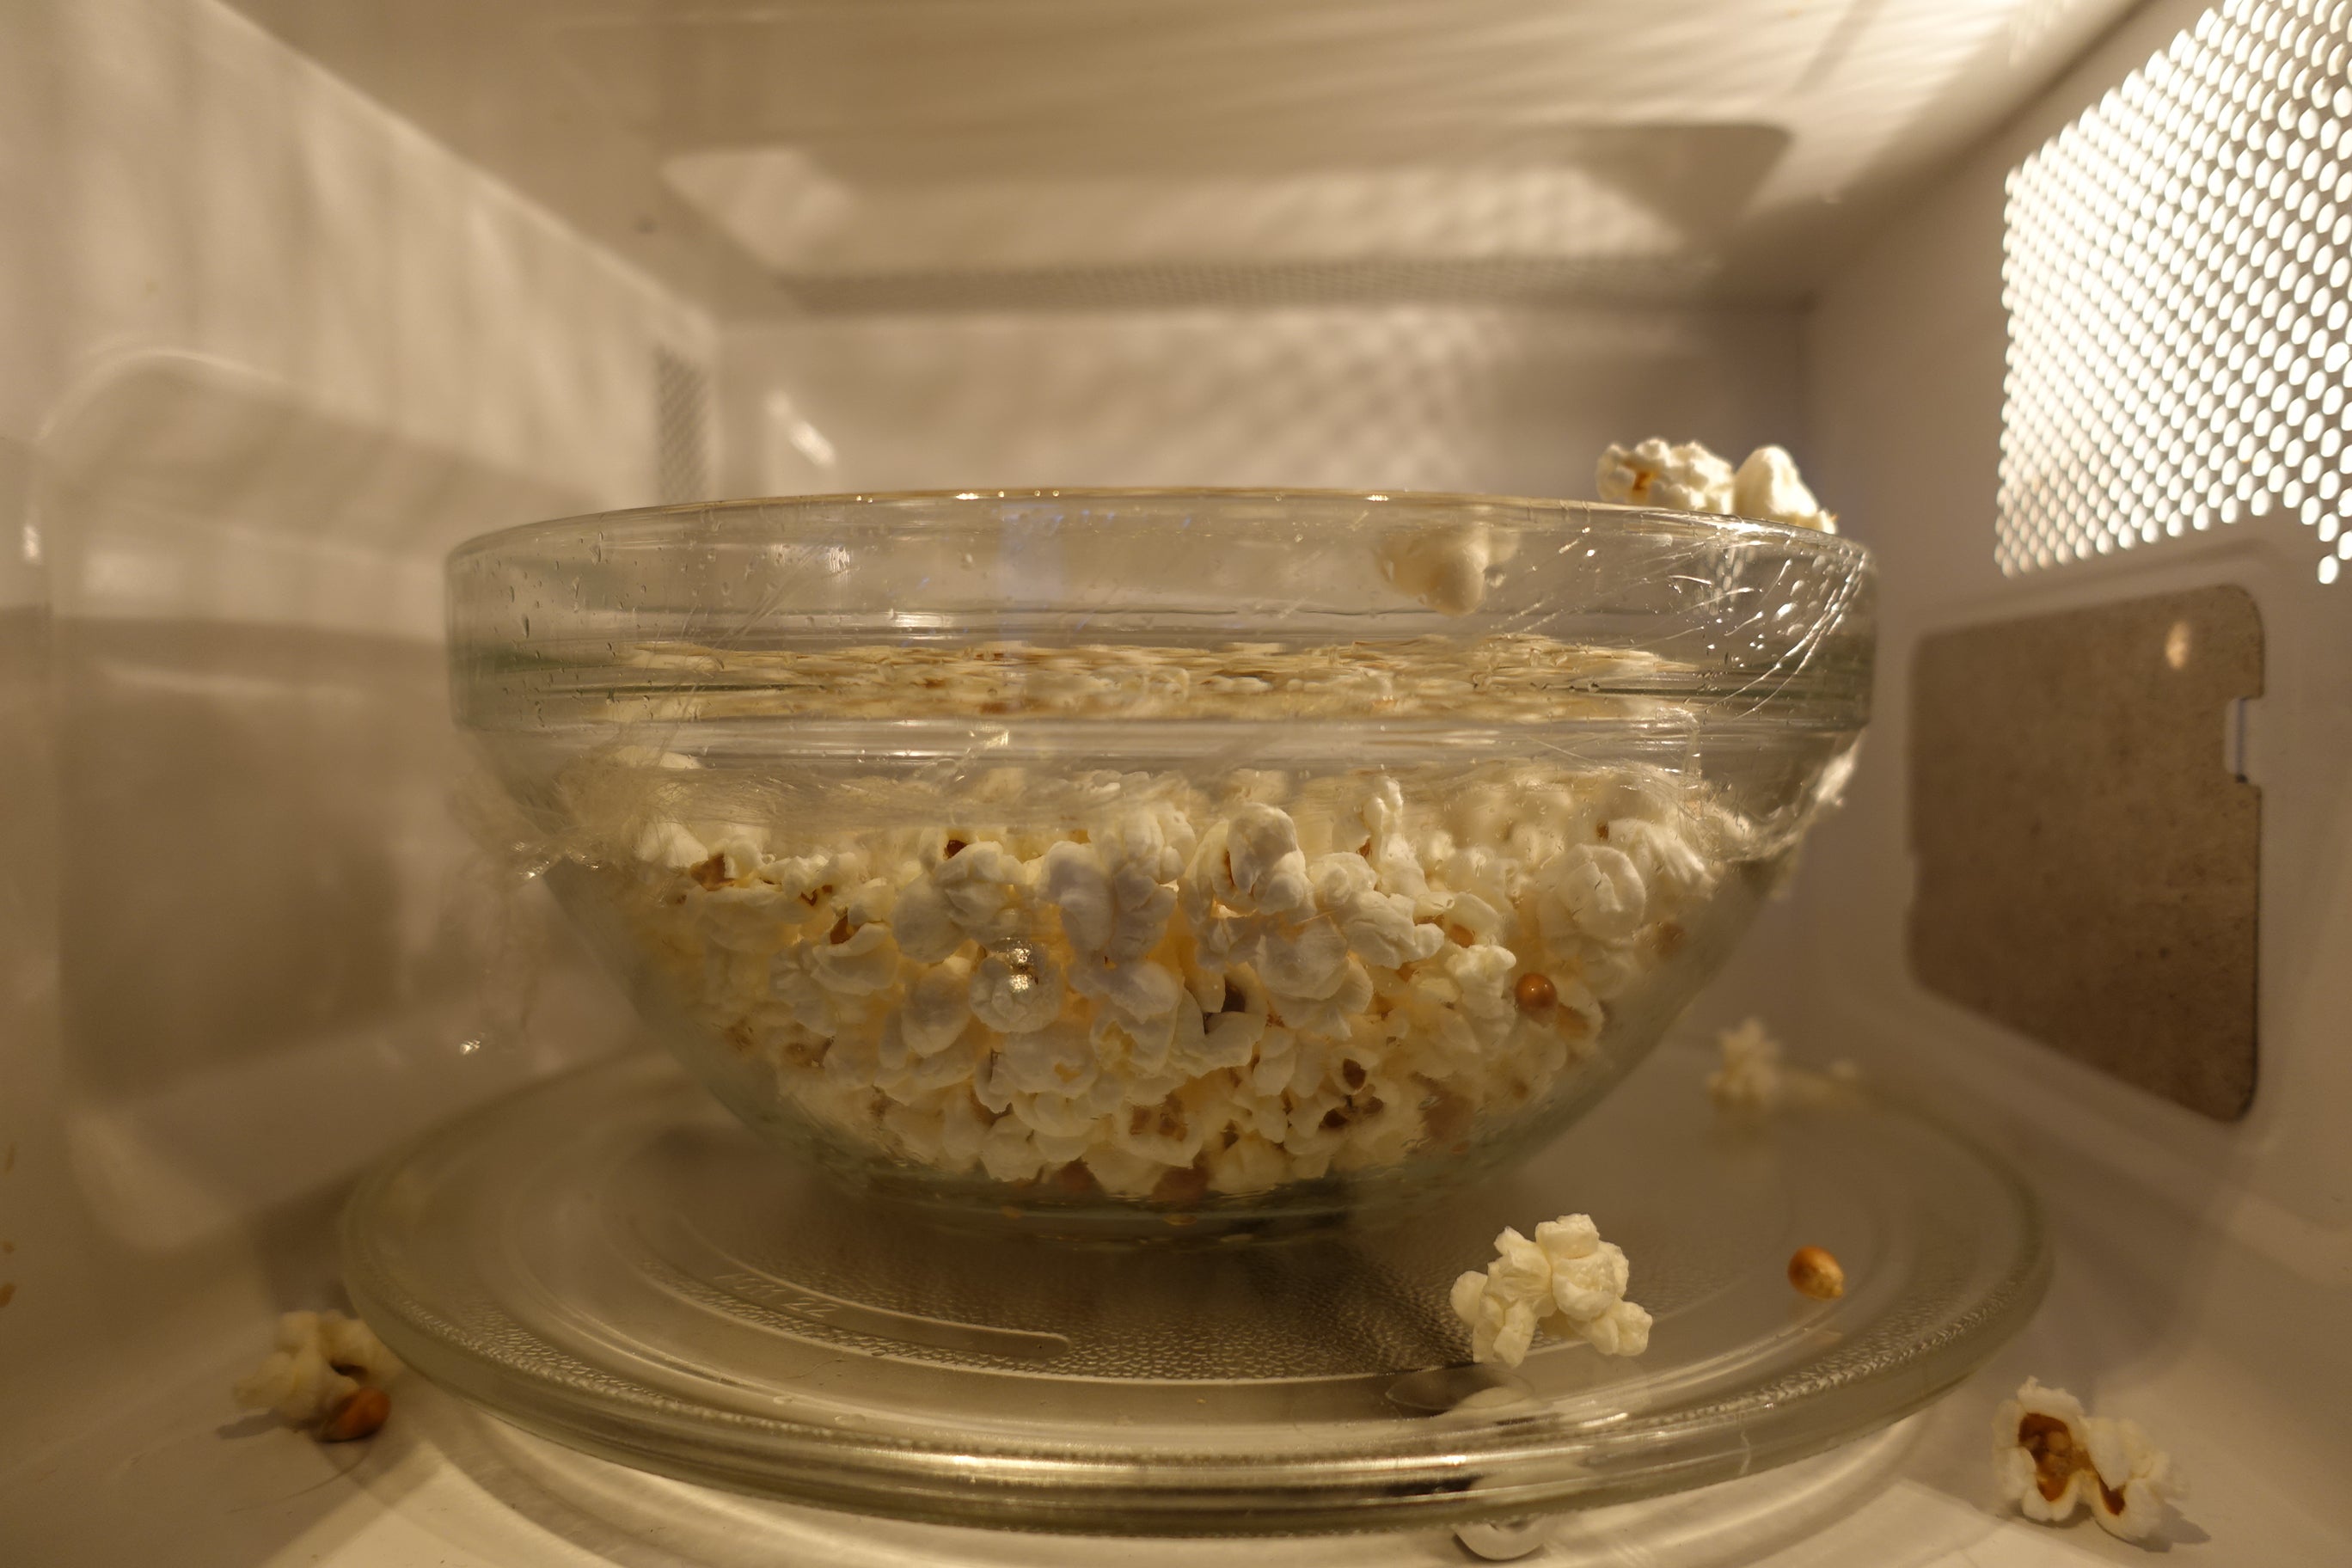 How to microwave popcorn